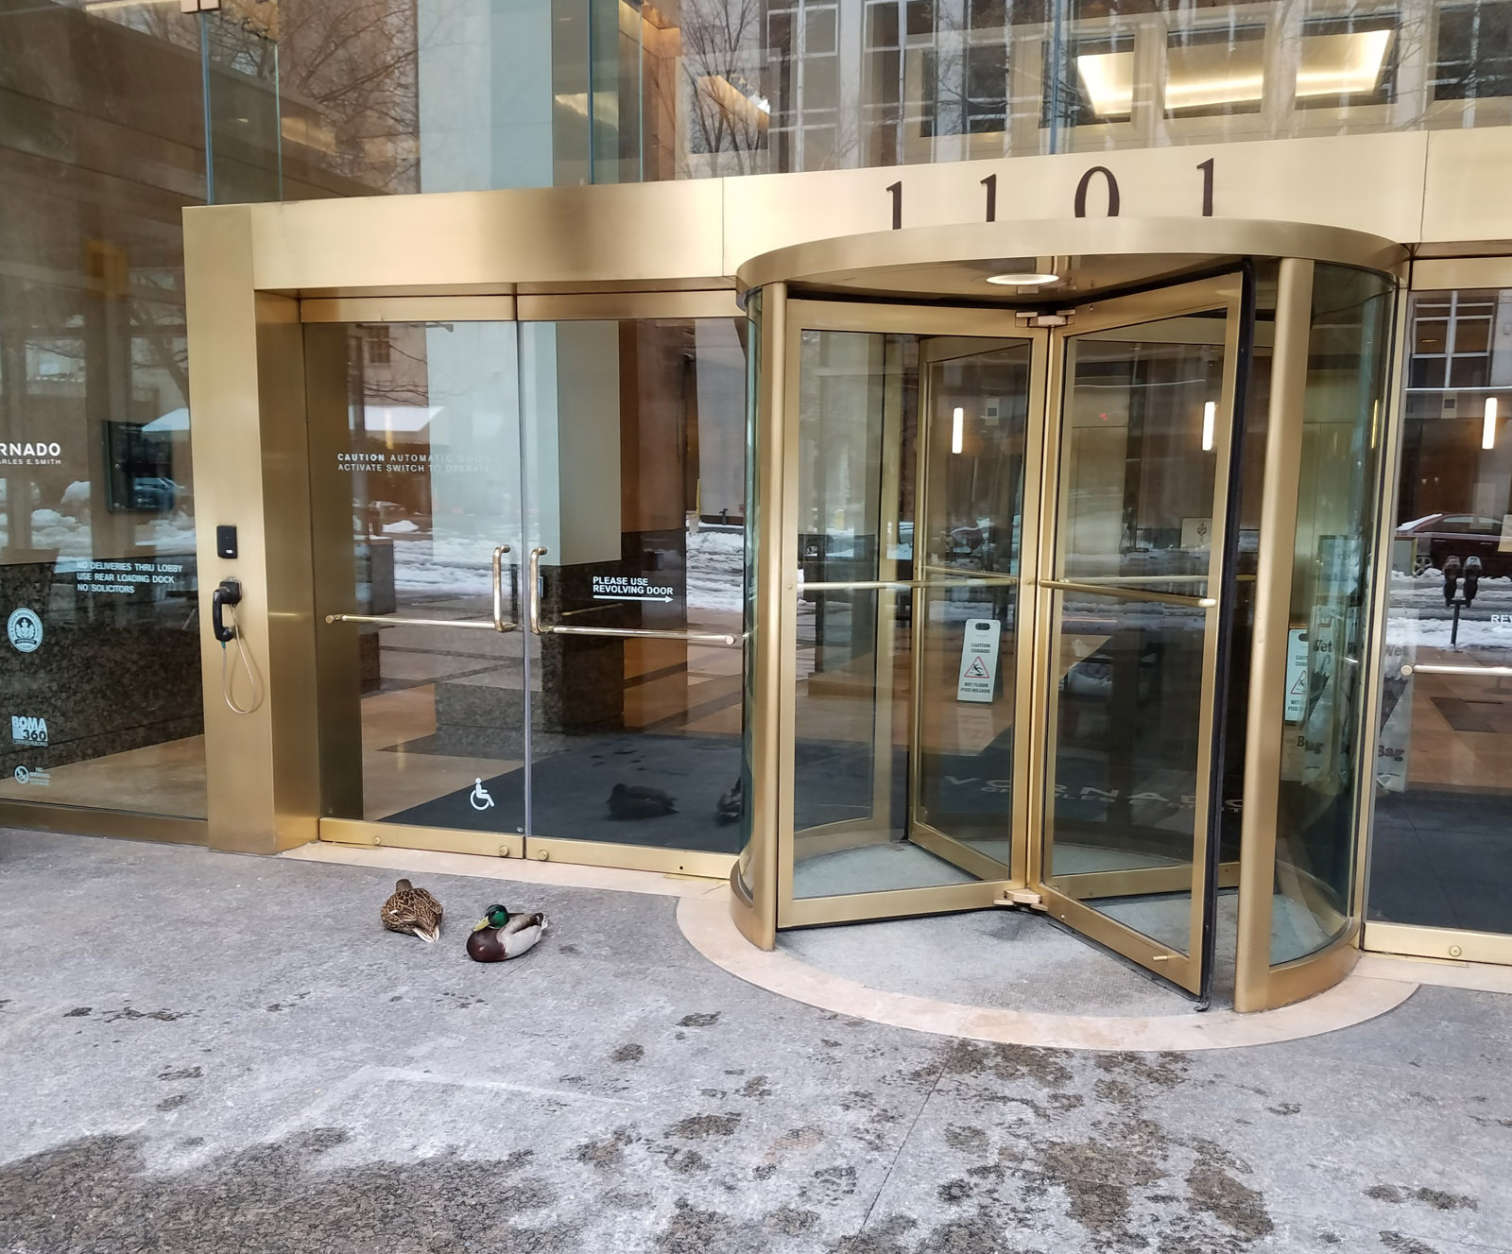 Love birds or snow birds? Two birds sit in the snow at the corner of 17th and L streets NW on a walk to work on Tuesday. (Courtesy Bruce Familant)